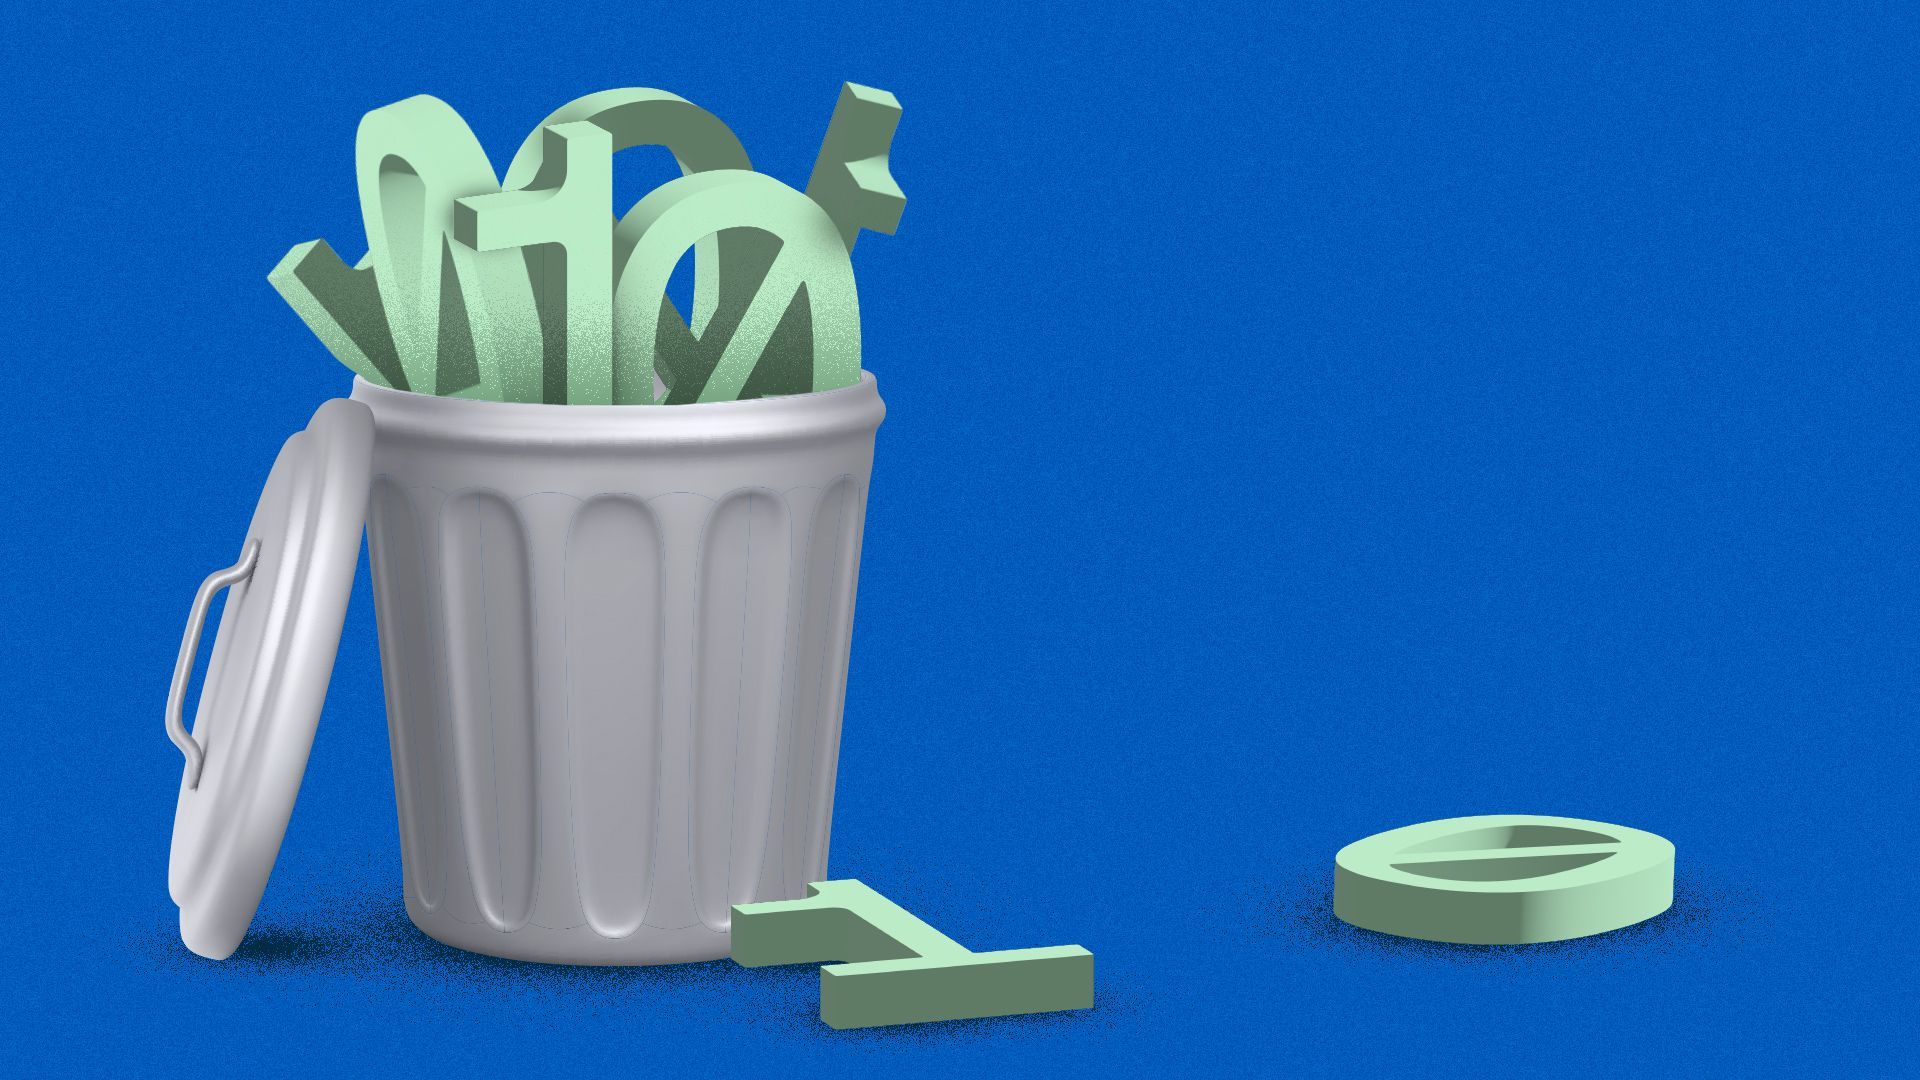 Illustration of a trash bin full of zeros and ones, with a few on the ground around the bin. 